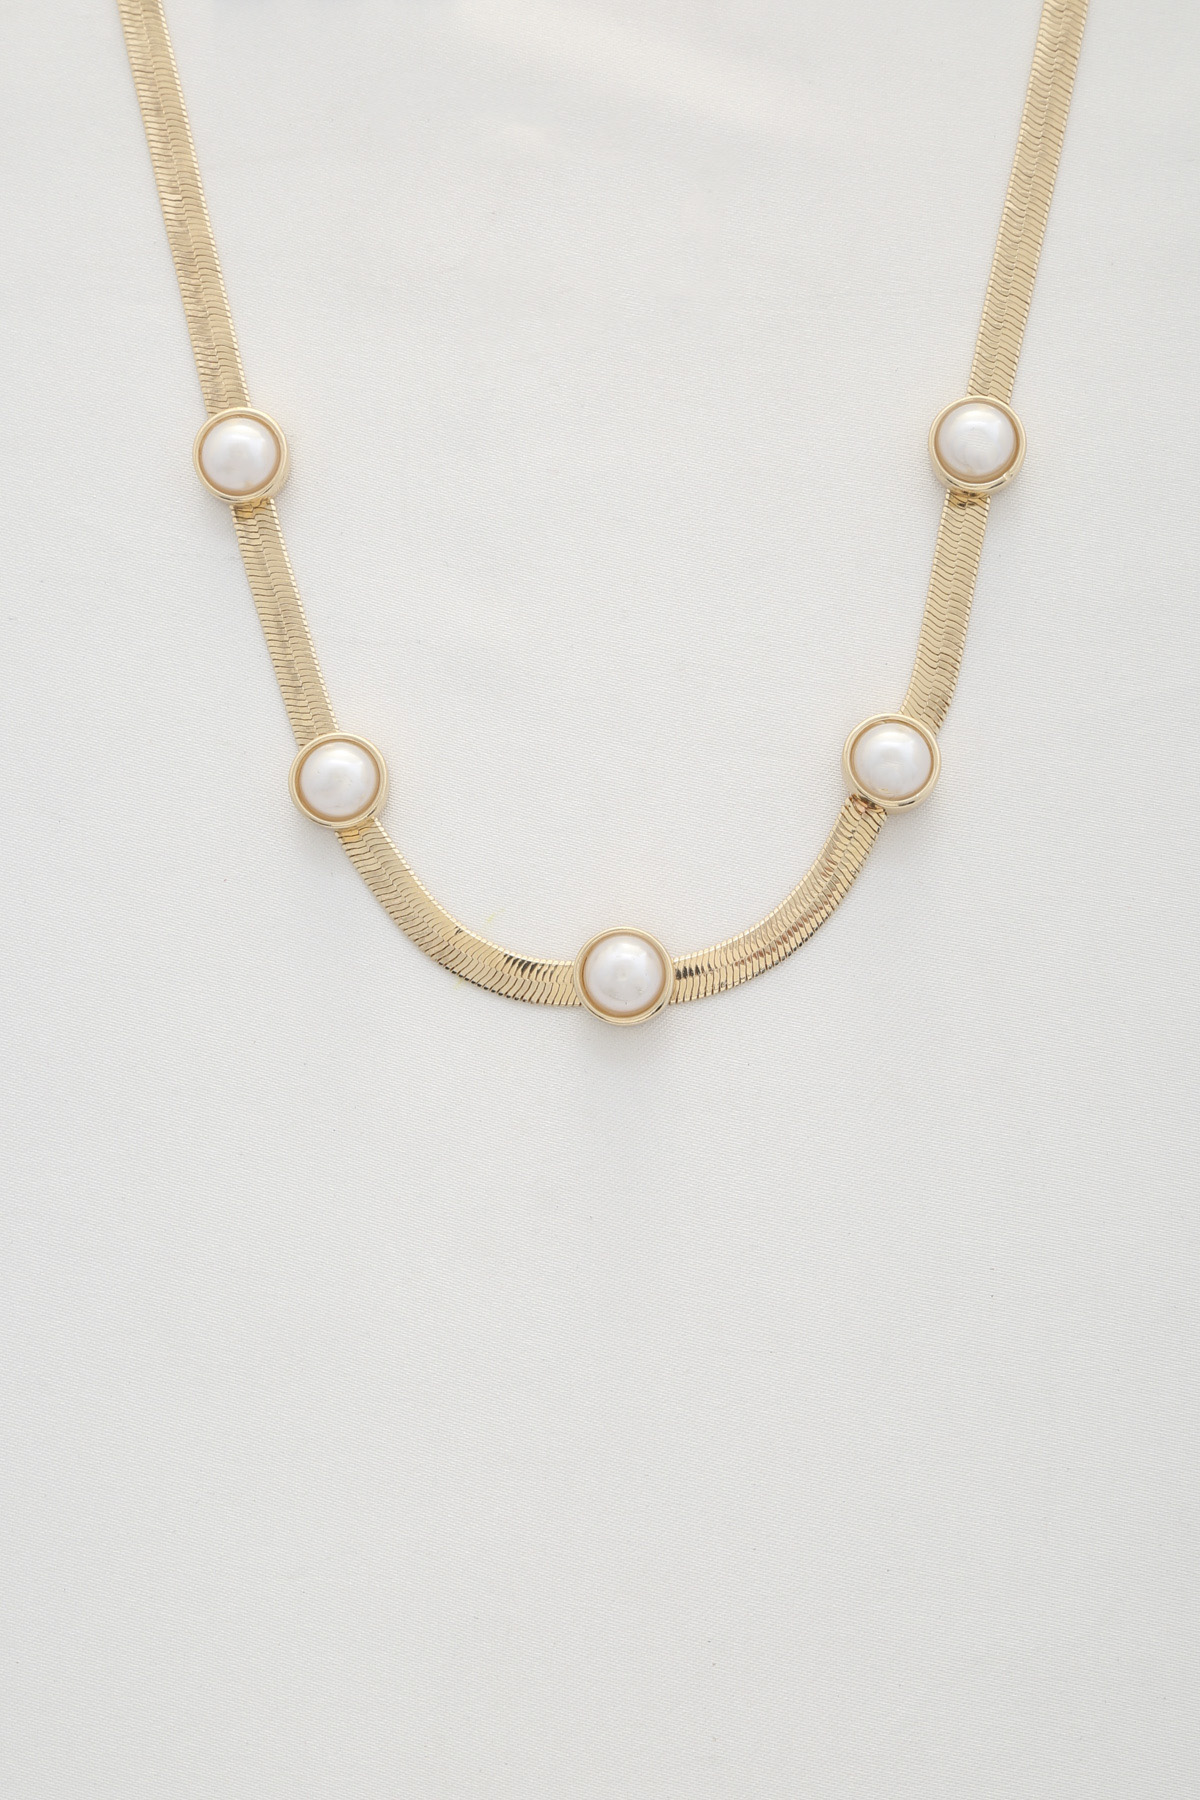 PEARL BEAD FLAT SNAKE CHAIN NECKLACE